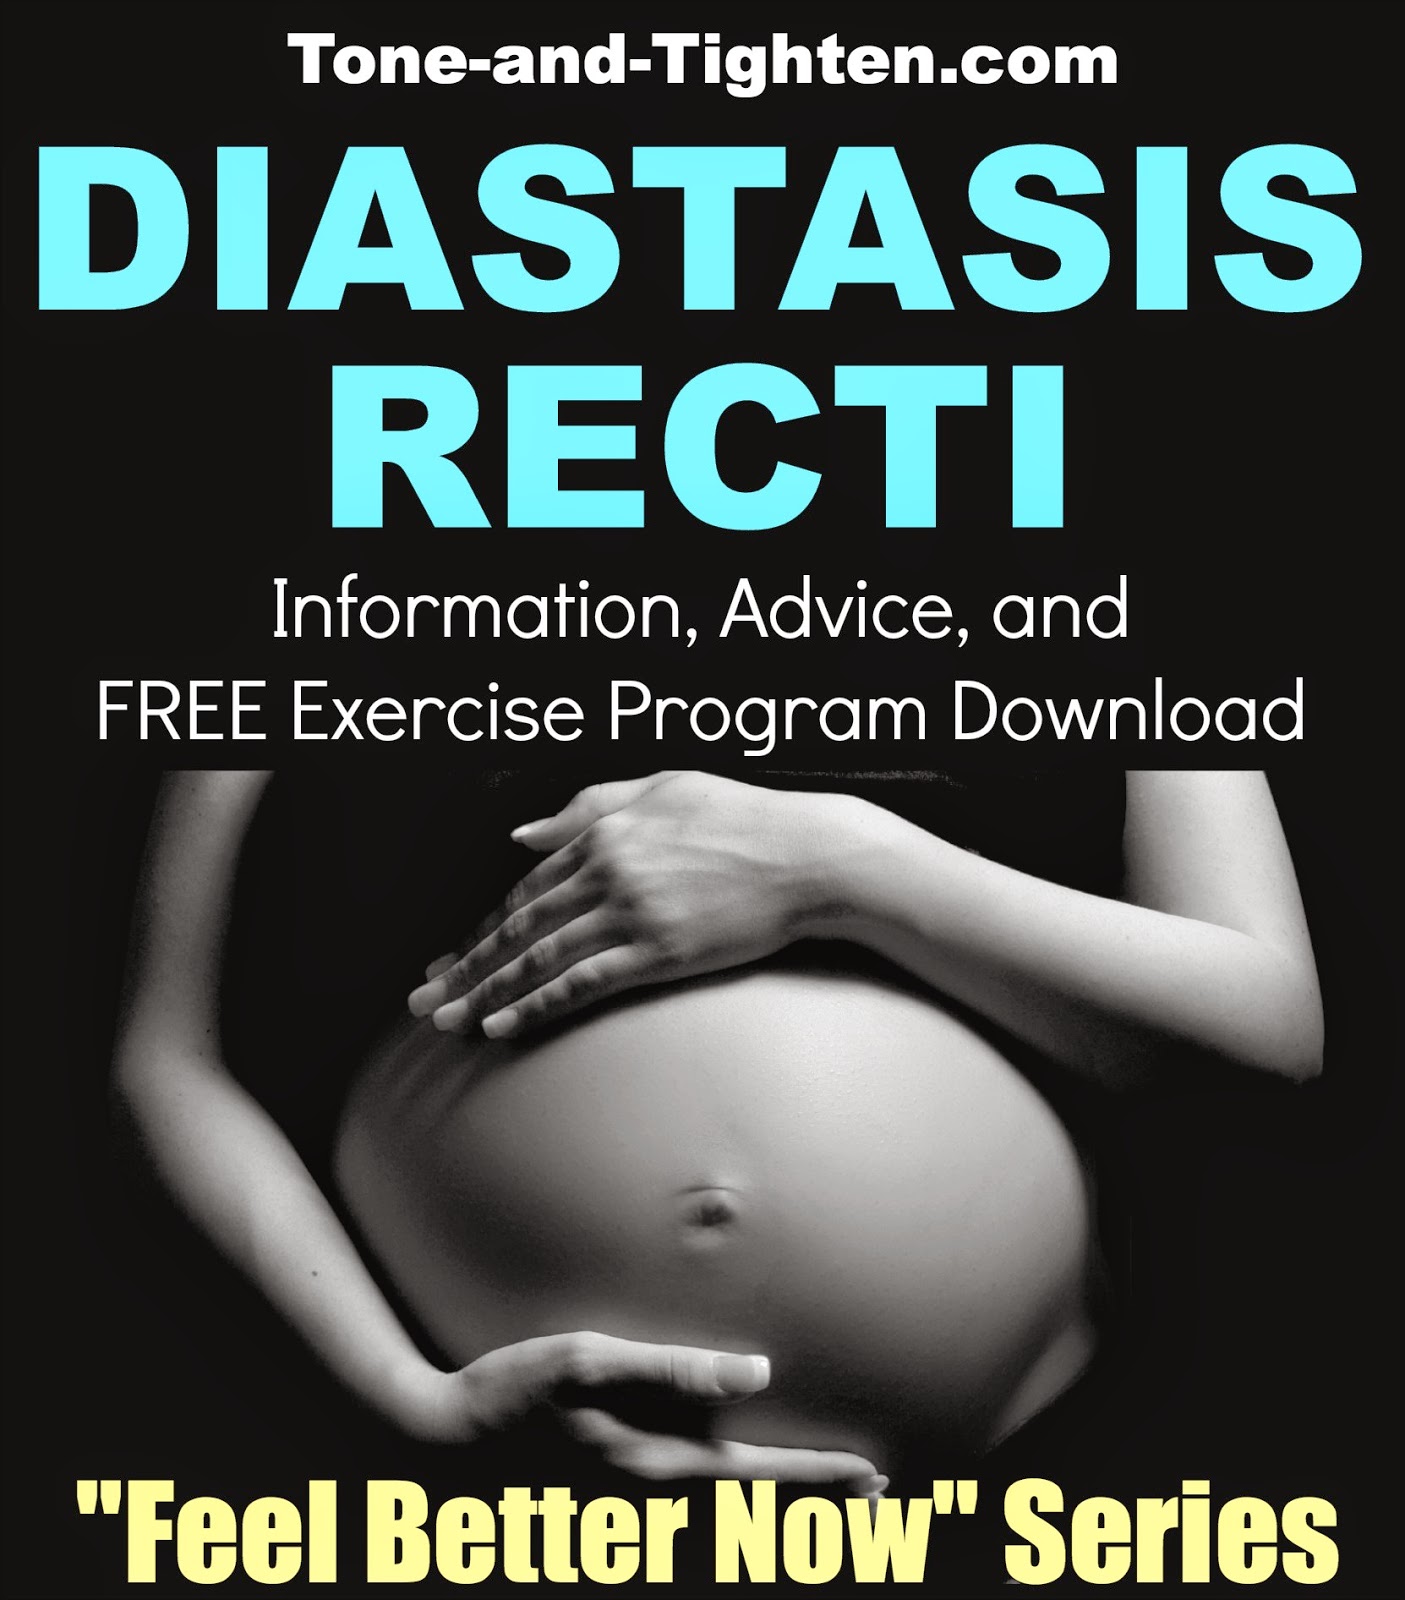 http://www.toni-and-tighten.com/2014/03/how-to-treat-diastasis recti--advice-and.html